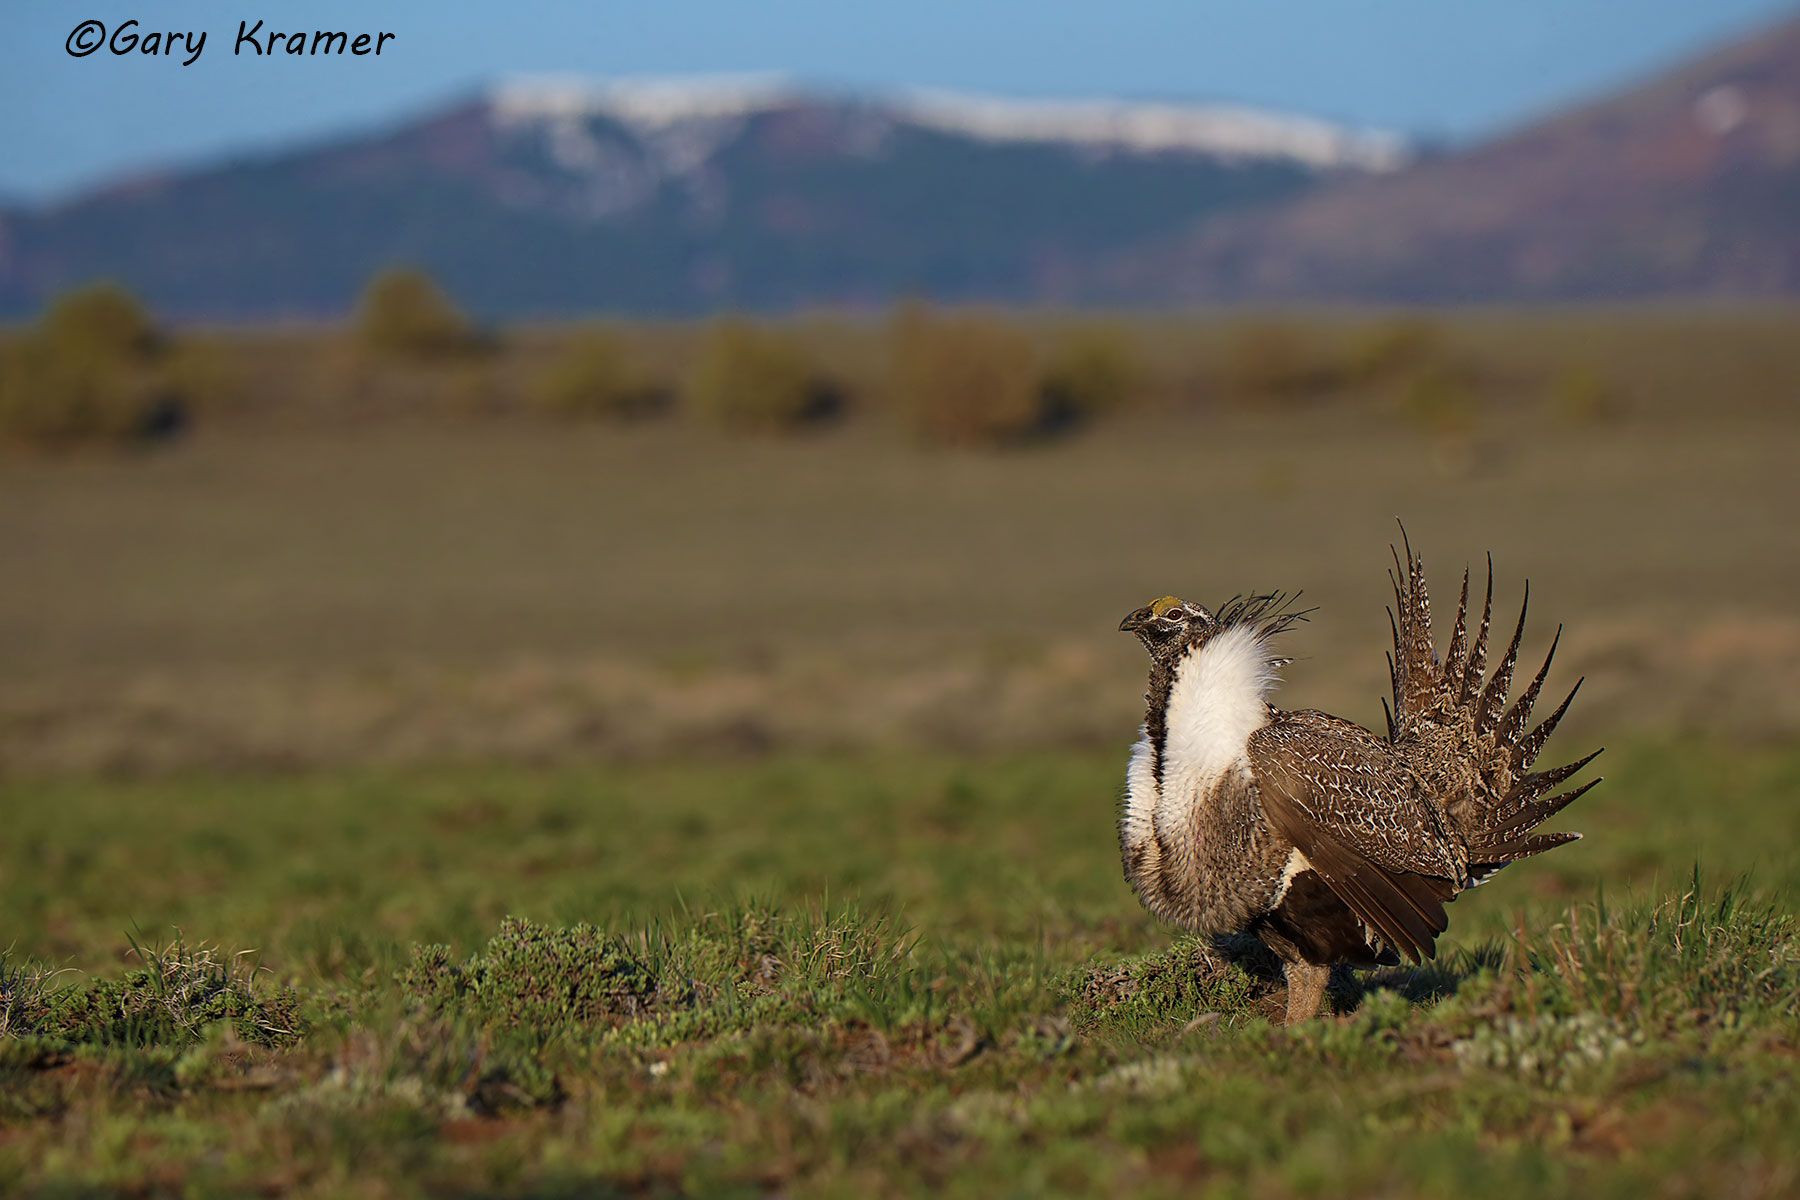 Greater Sage Grouse (Centrocercus urophasianus) - NBGGs#1793d